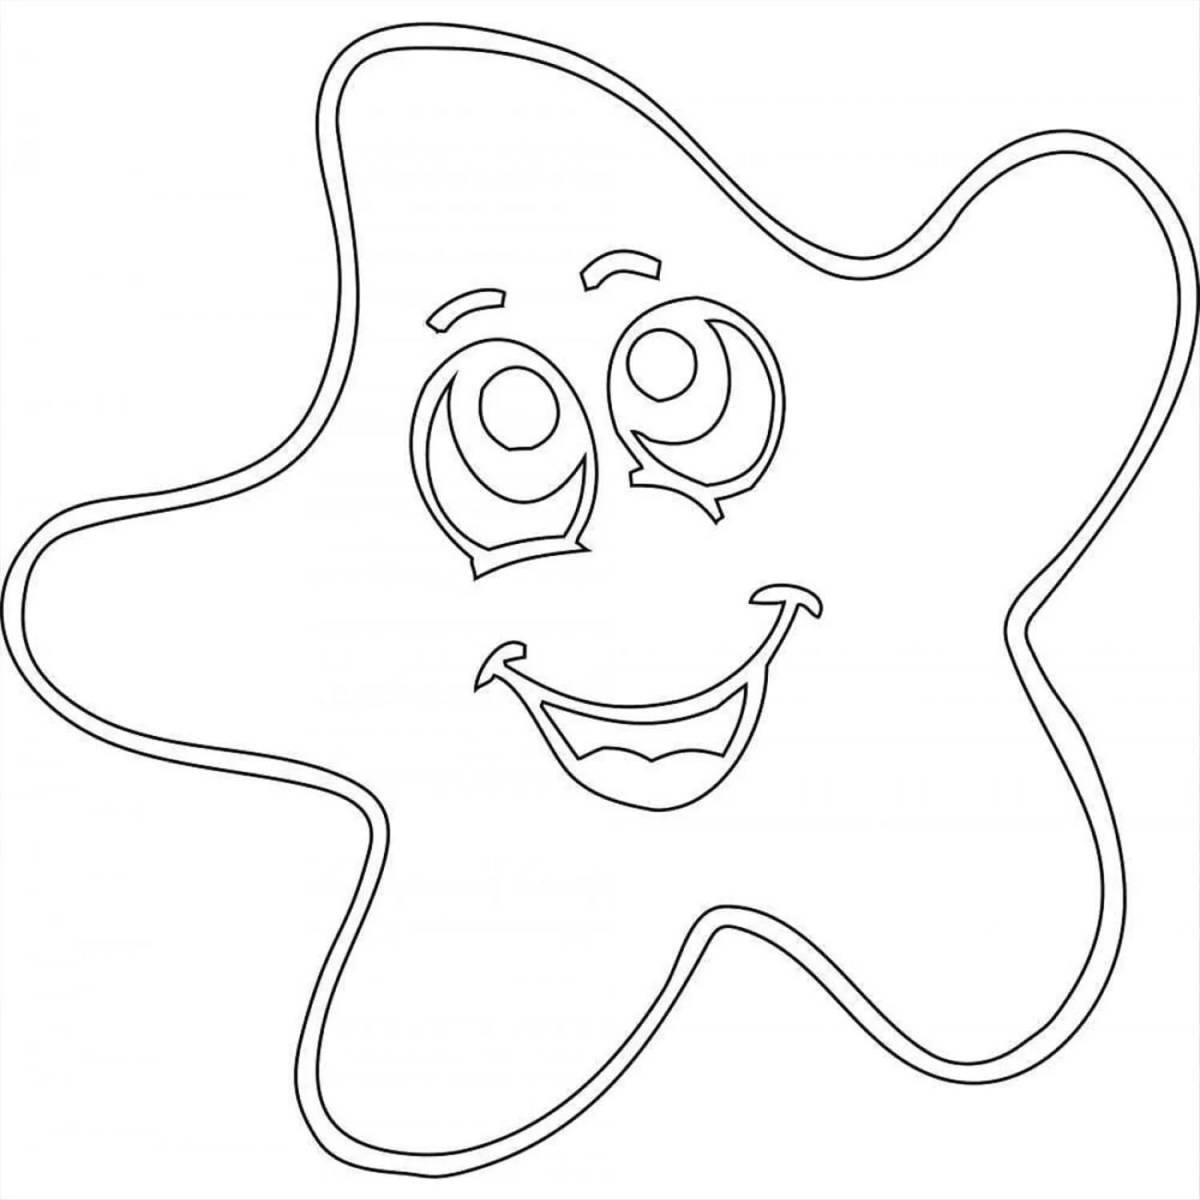 Magic shimmery coloring pages for kids